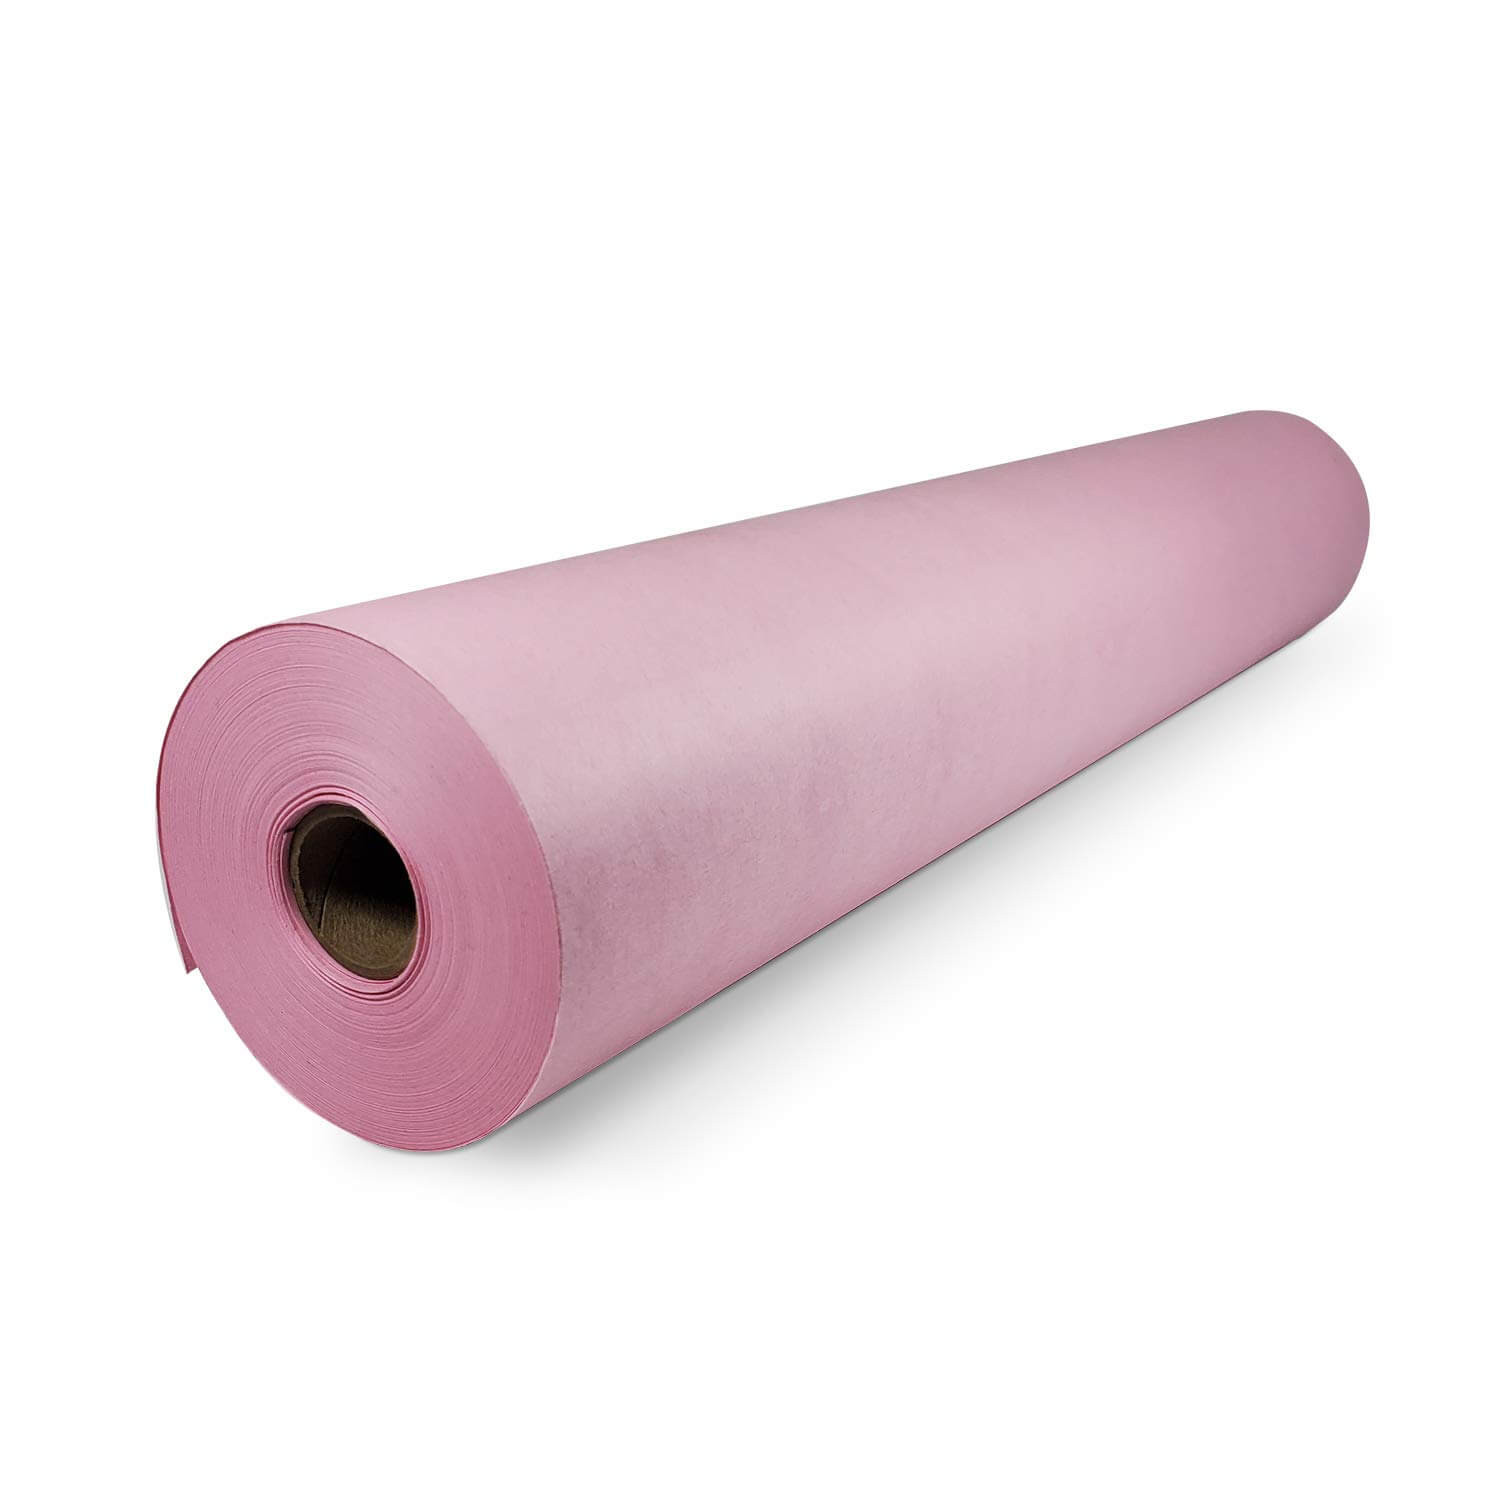 Paperchef 18 Culinary Pink Butcher Paper, 2 x 100 Square Foot Rolls